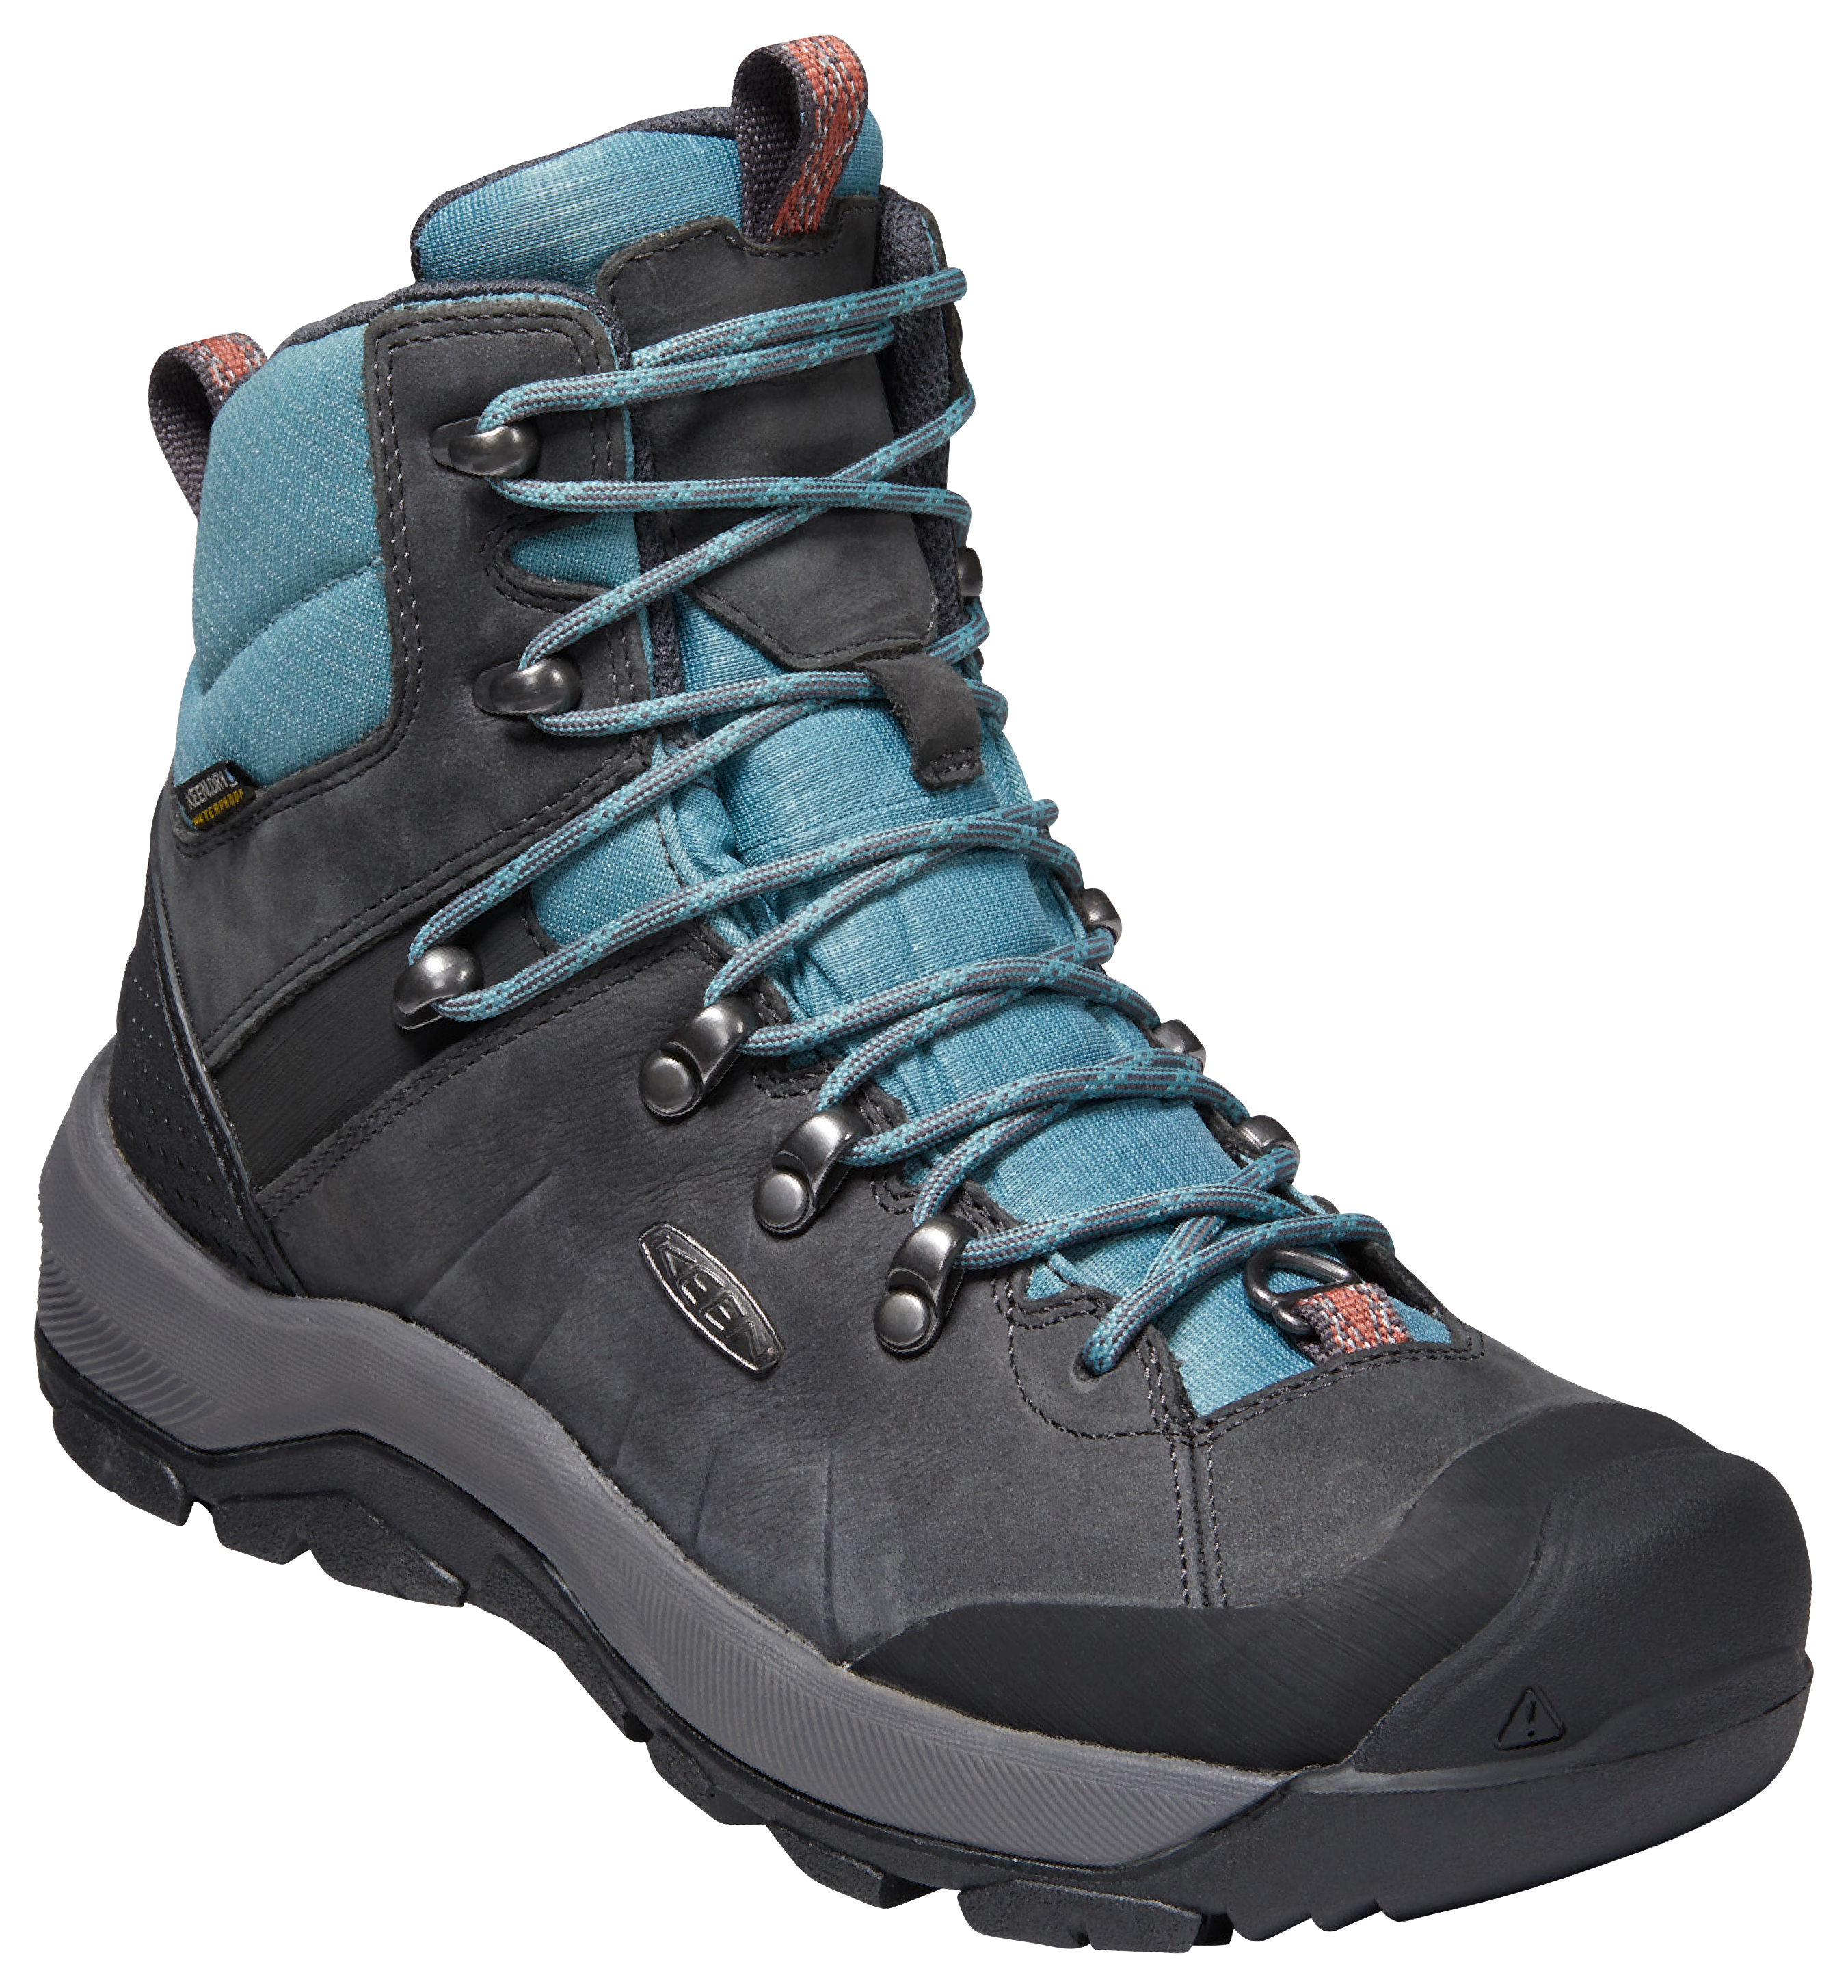 KEEN Revel IV Polar Insulated Waterproof Hiking Boots for Ladies - Magnet/North Atlantic - 7M